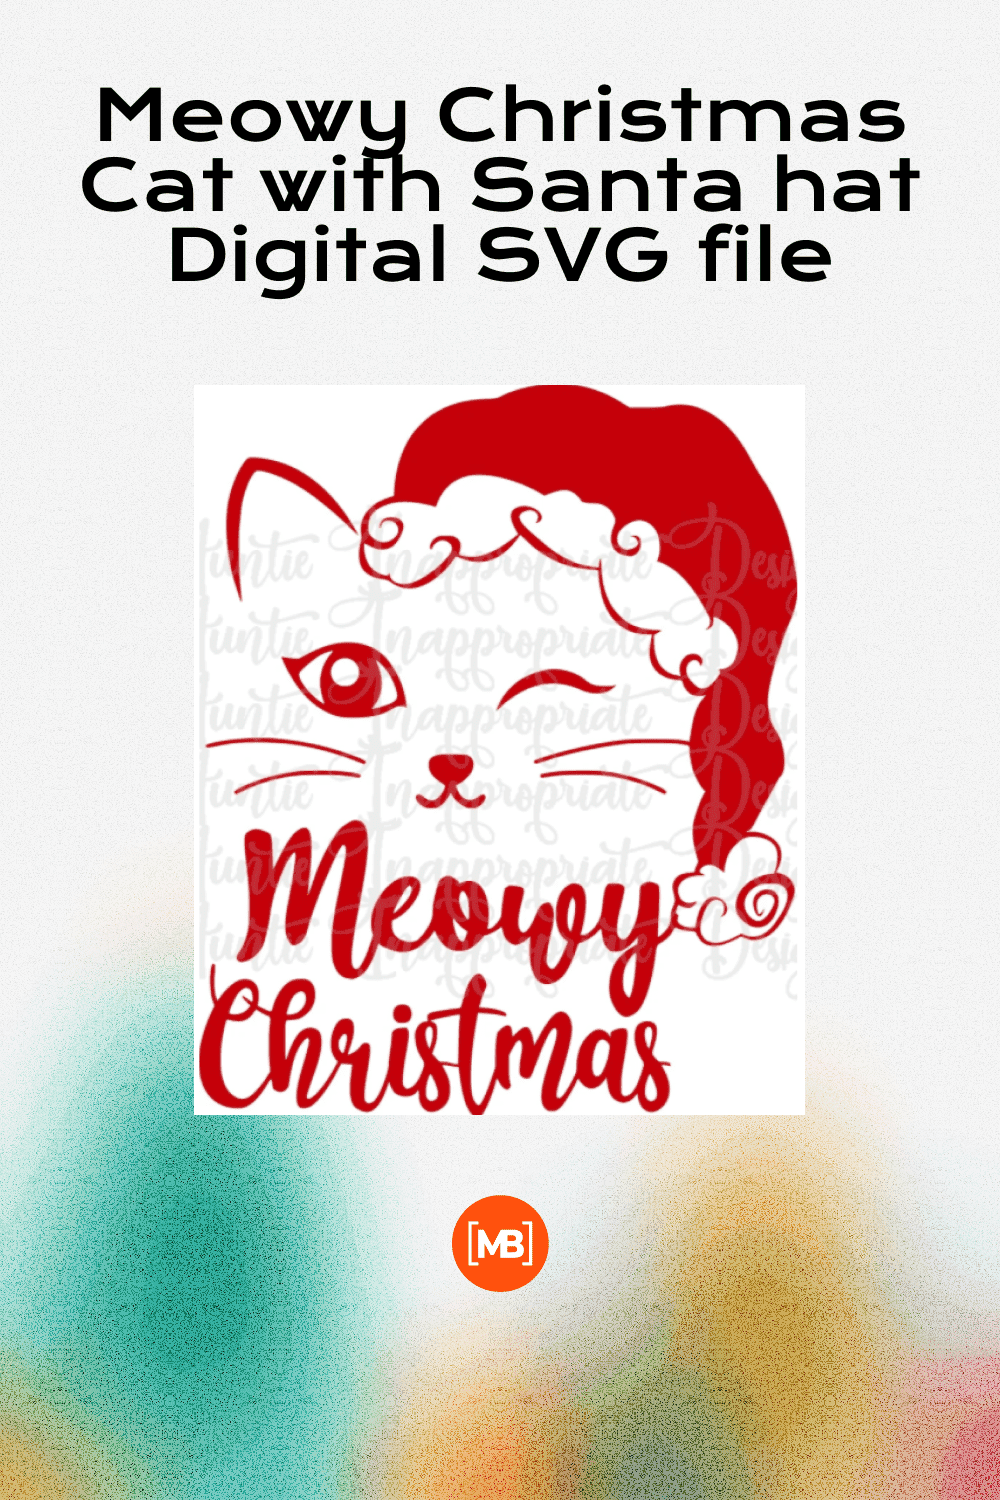 Meowy Christmas Cat with Santa hat Digital SVG file.